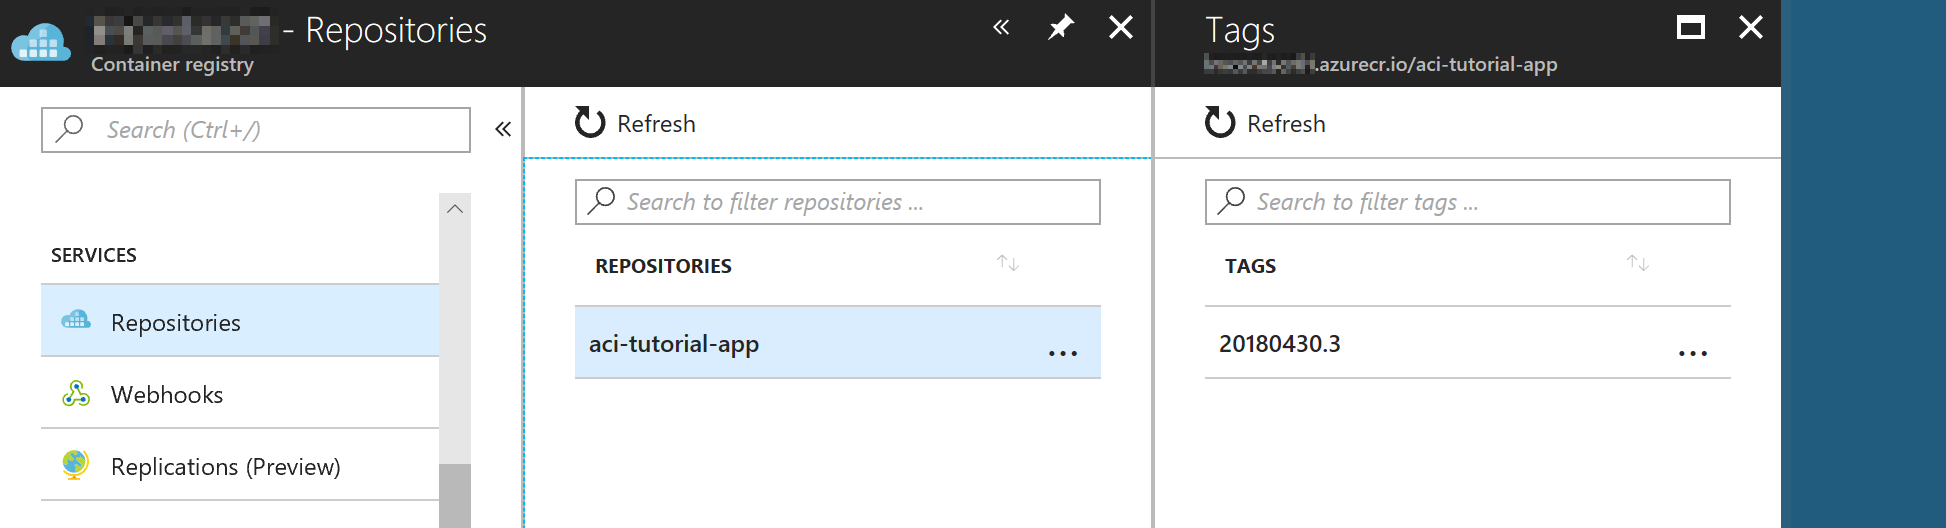 Azure: Registry containers